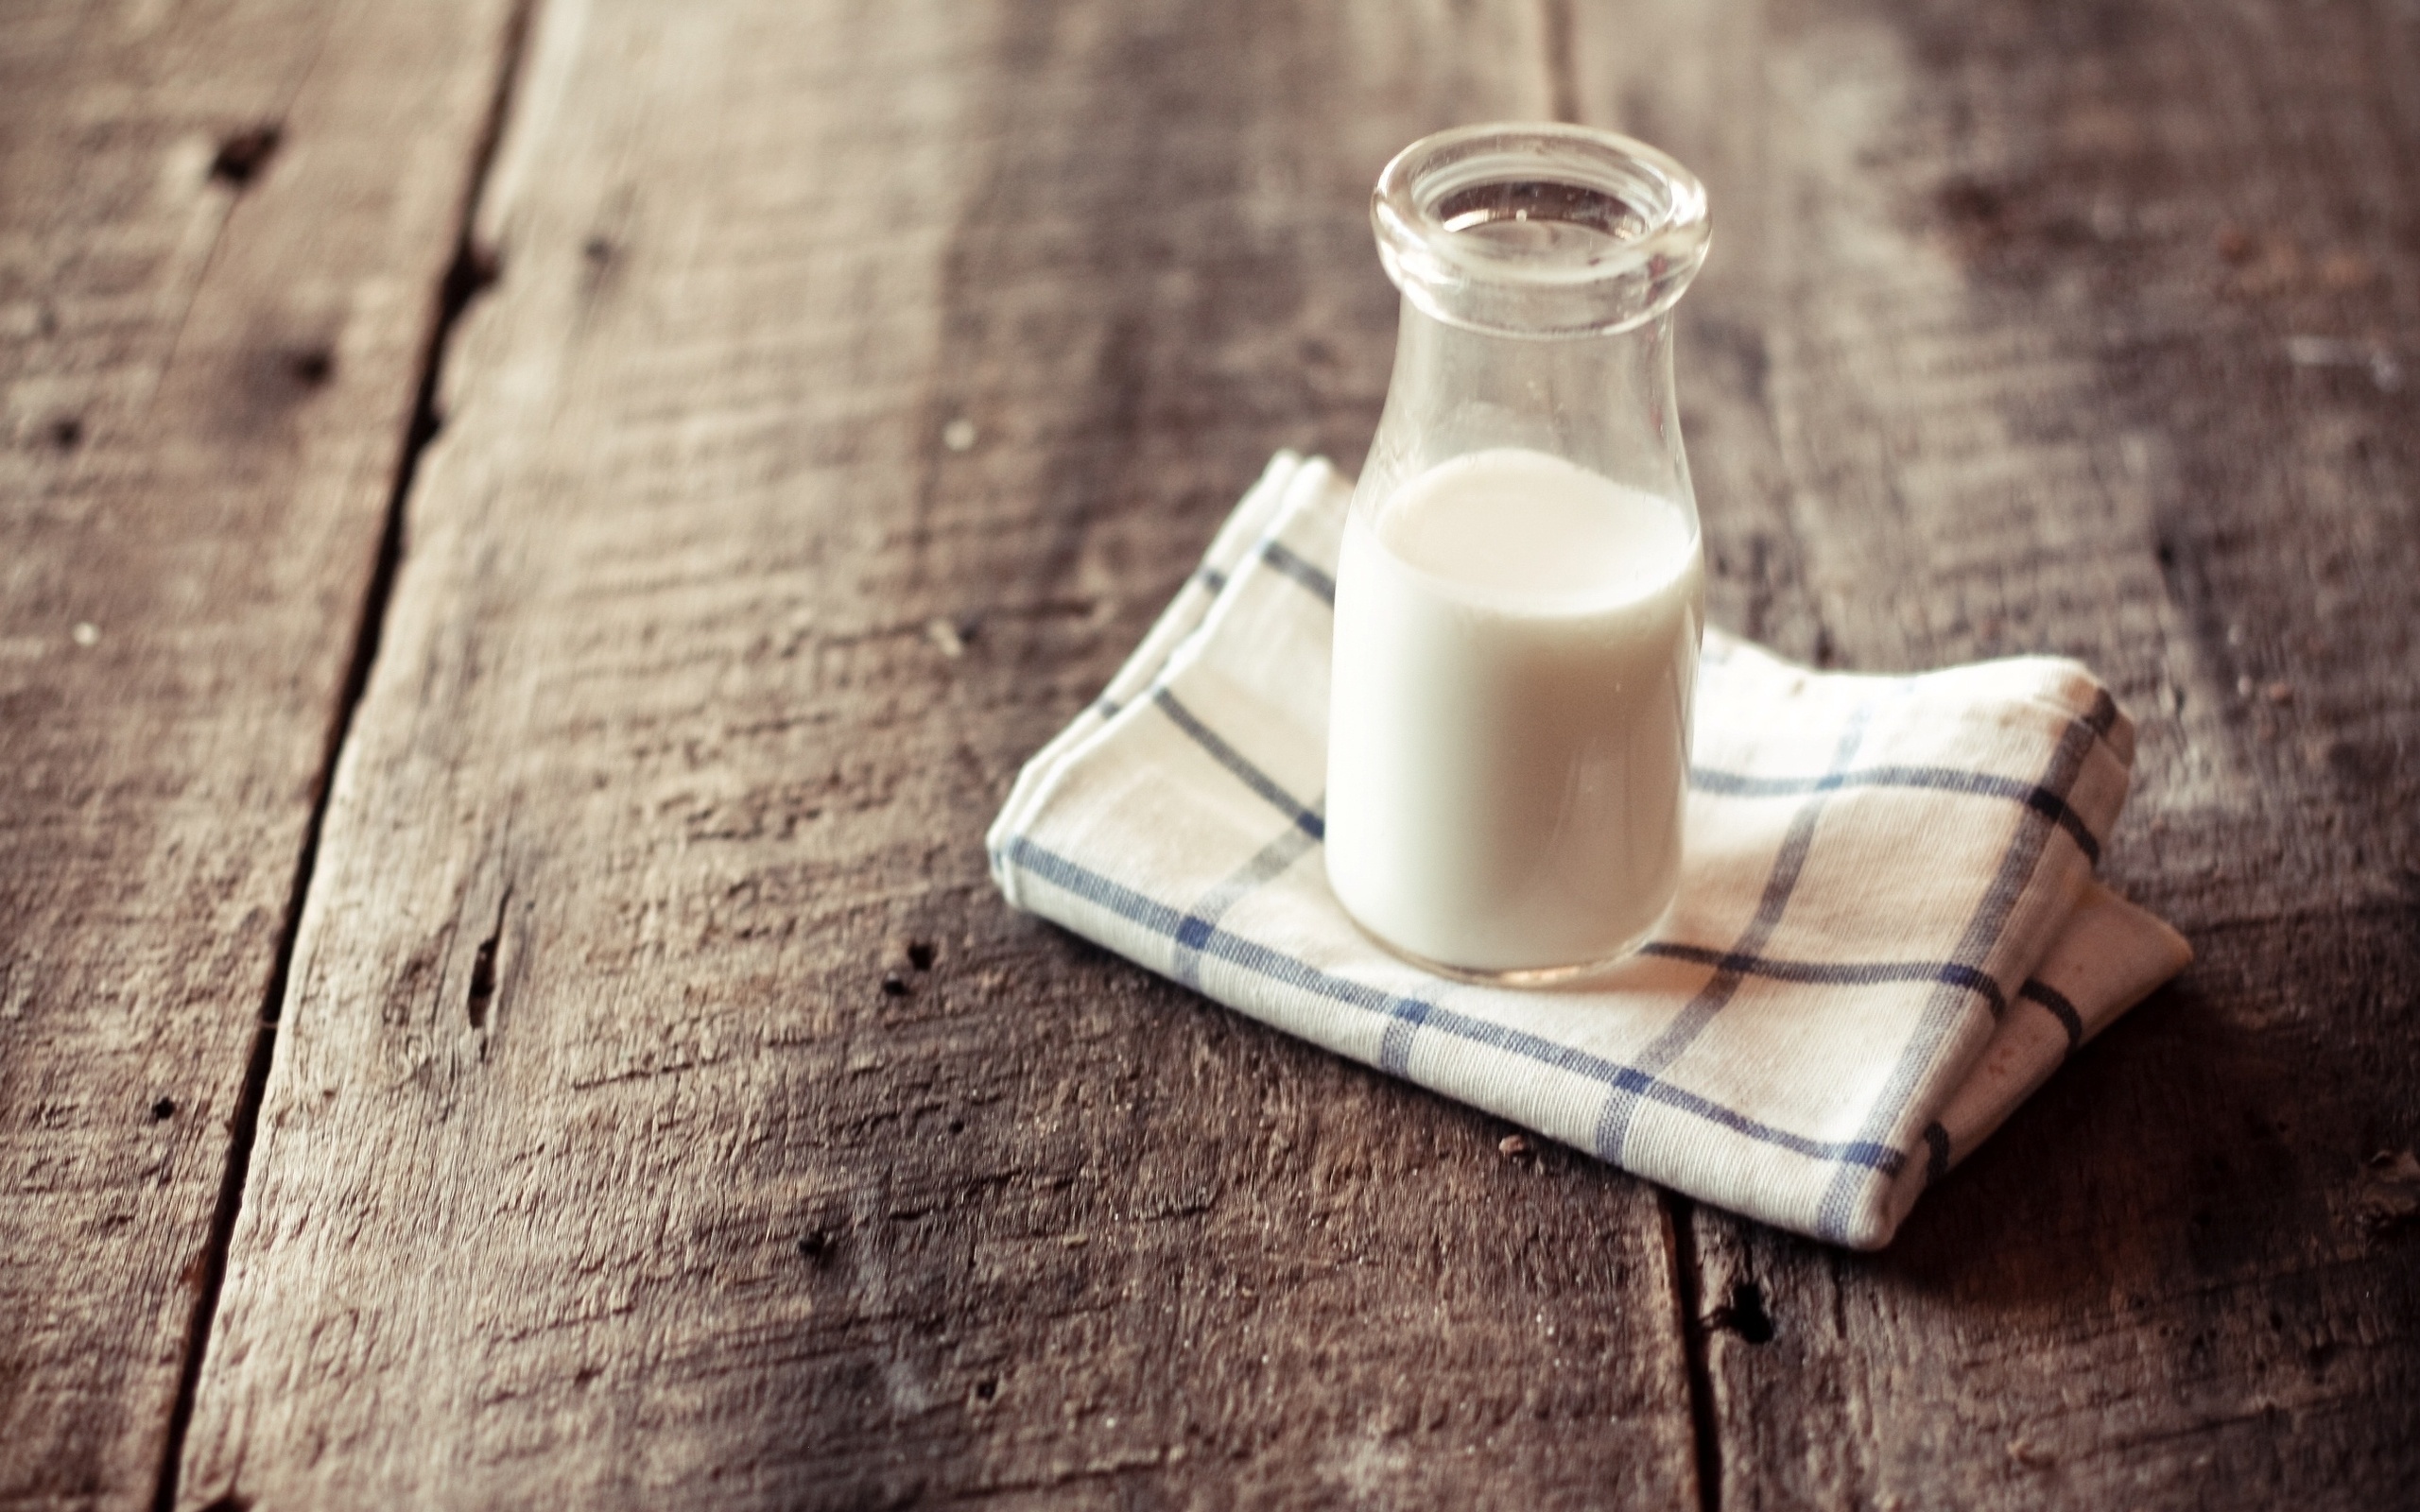 Milk: An emulsion of fat and protein in water, Natural food. 2560x1600 HD Wallpaper.